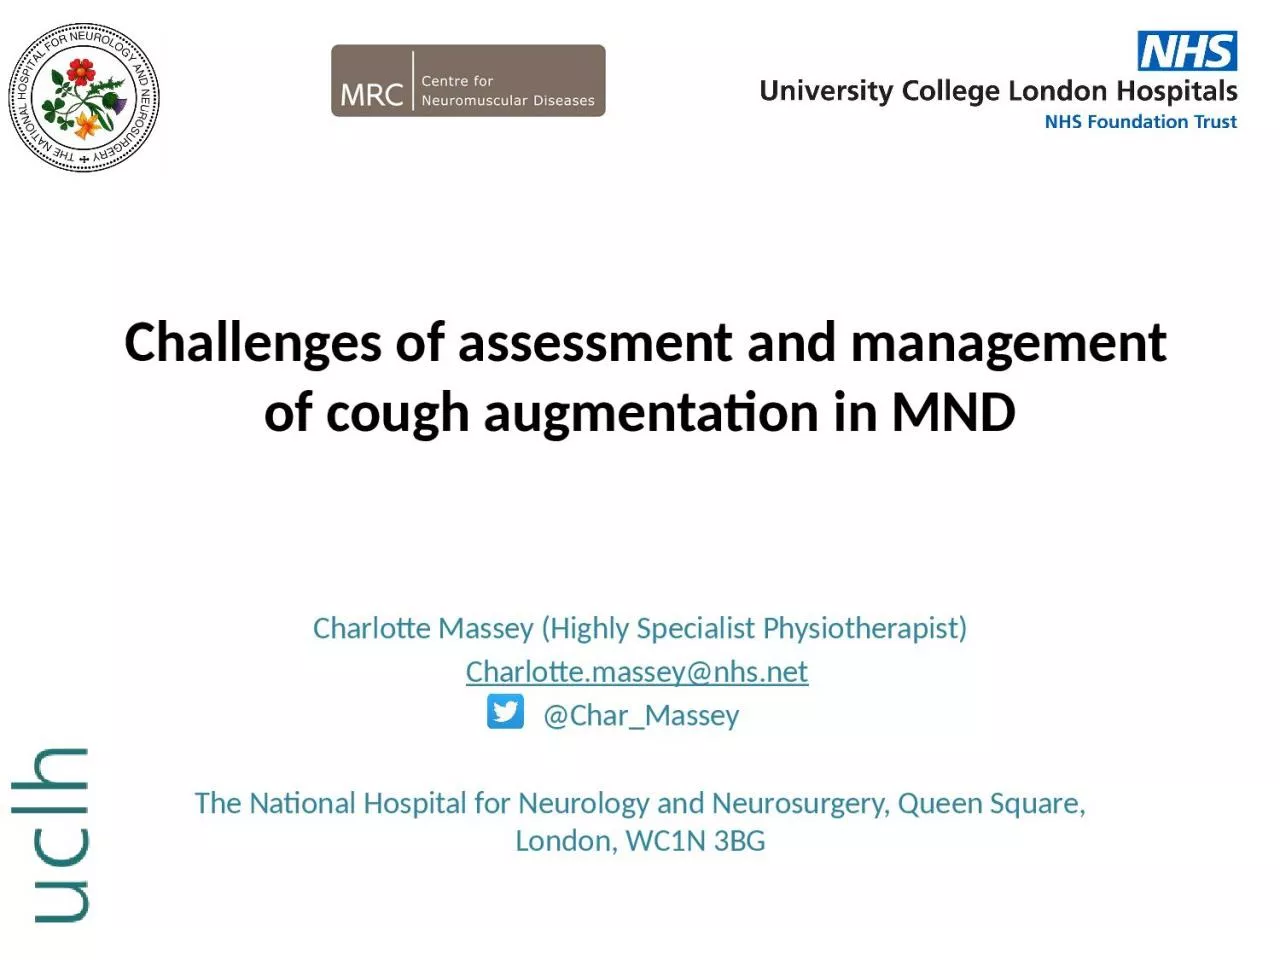 Challenges of assessment and management of cough augmentation in MND